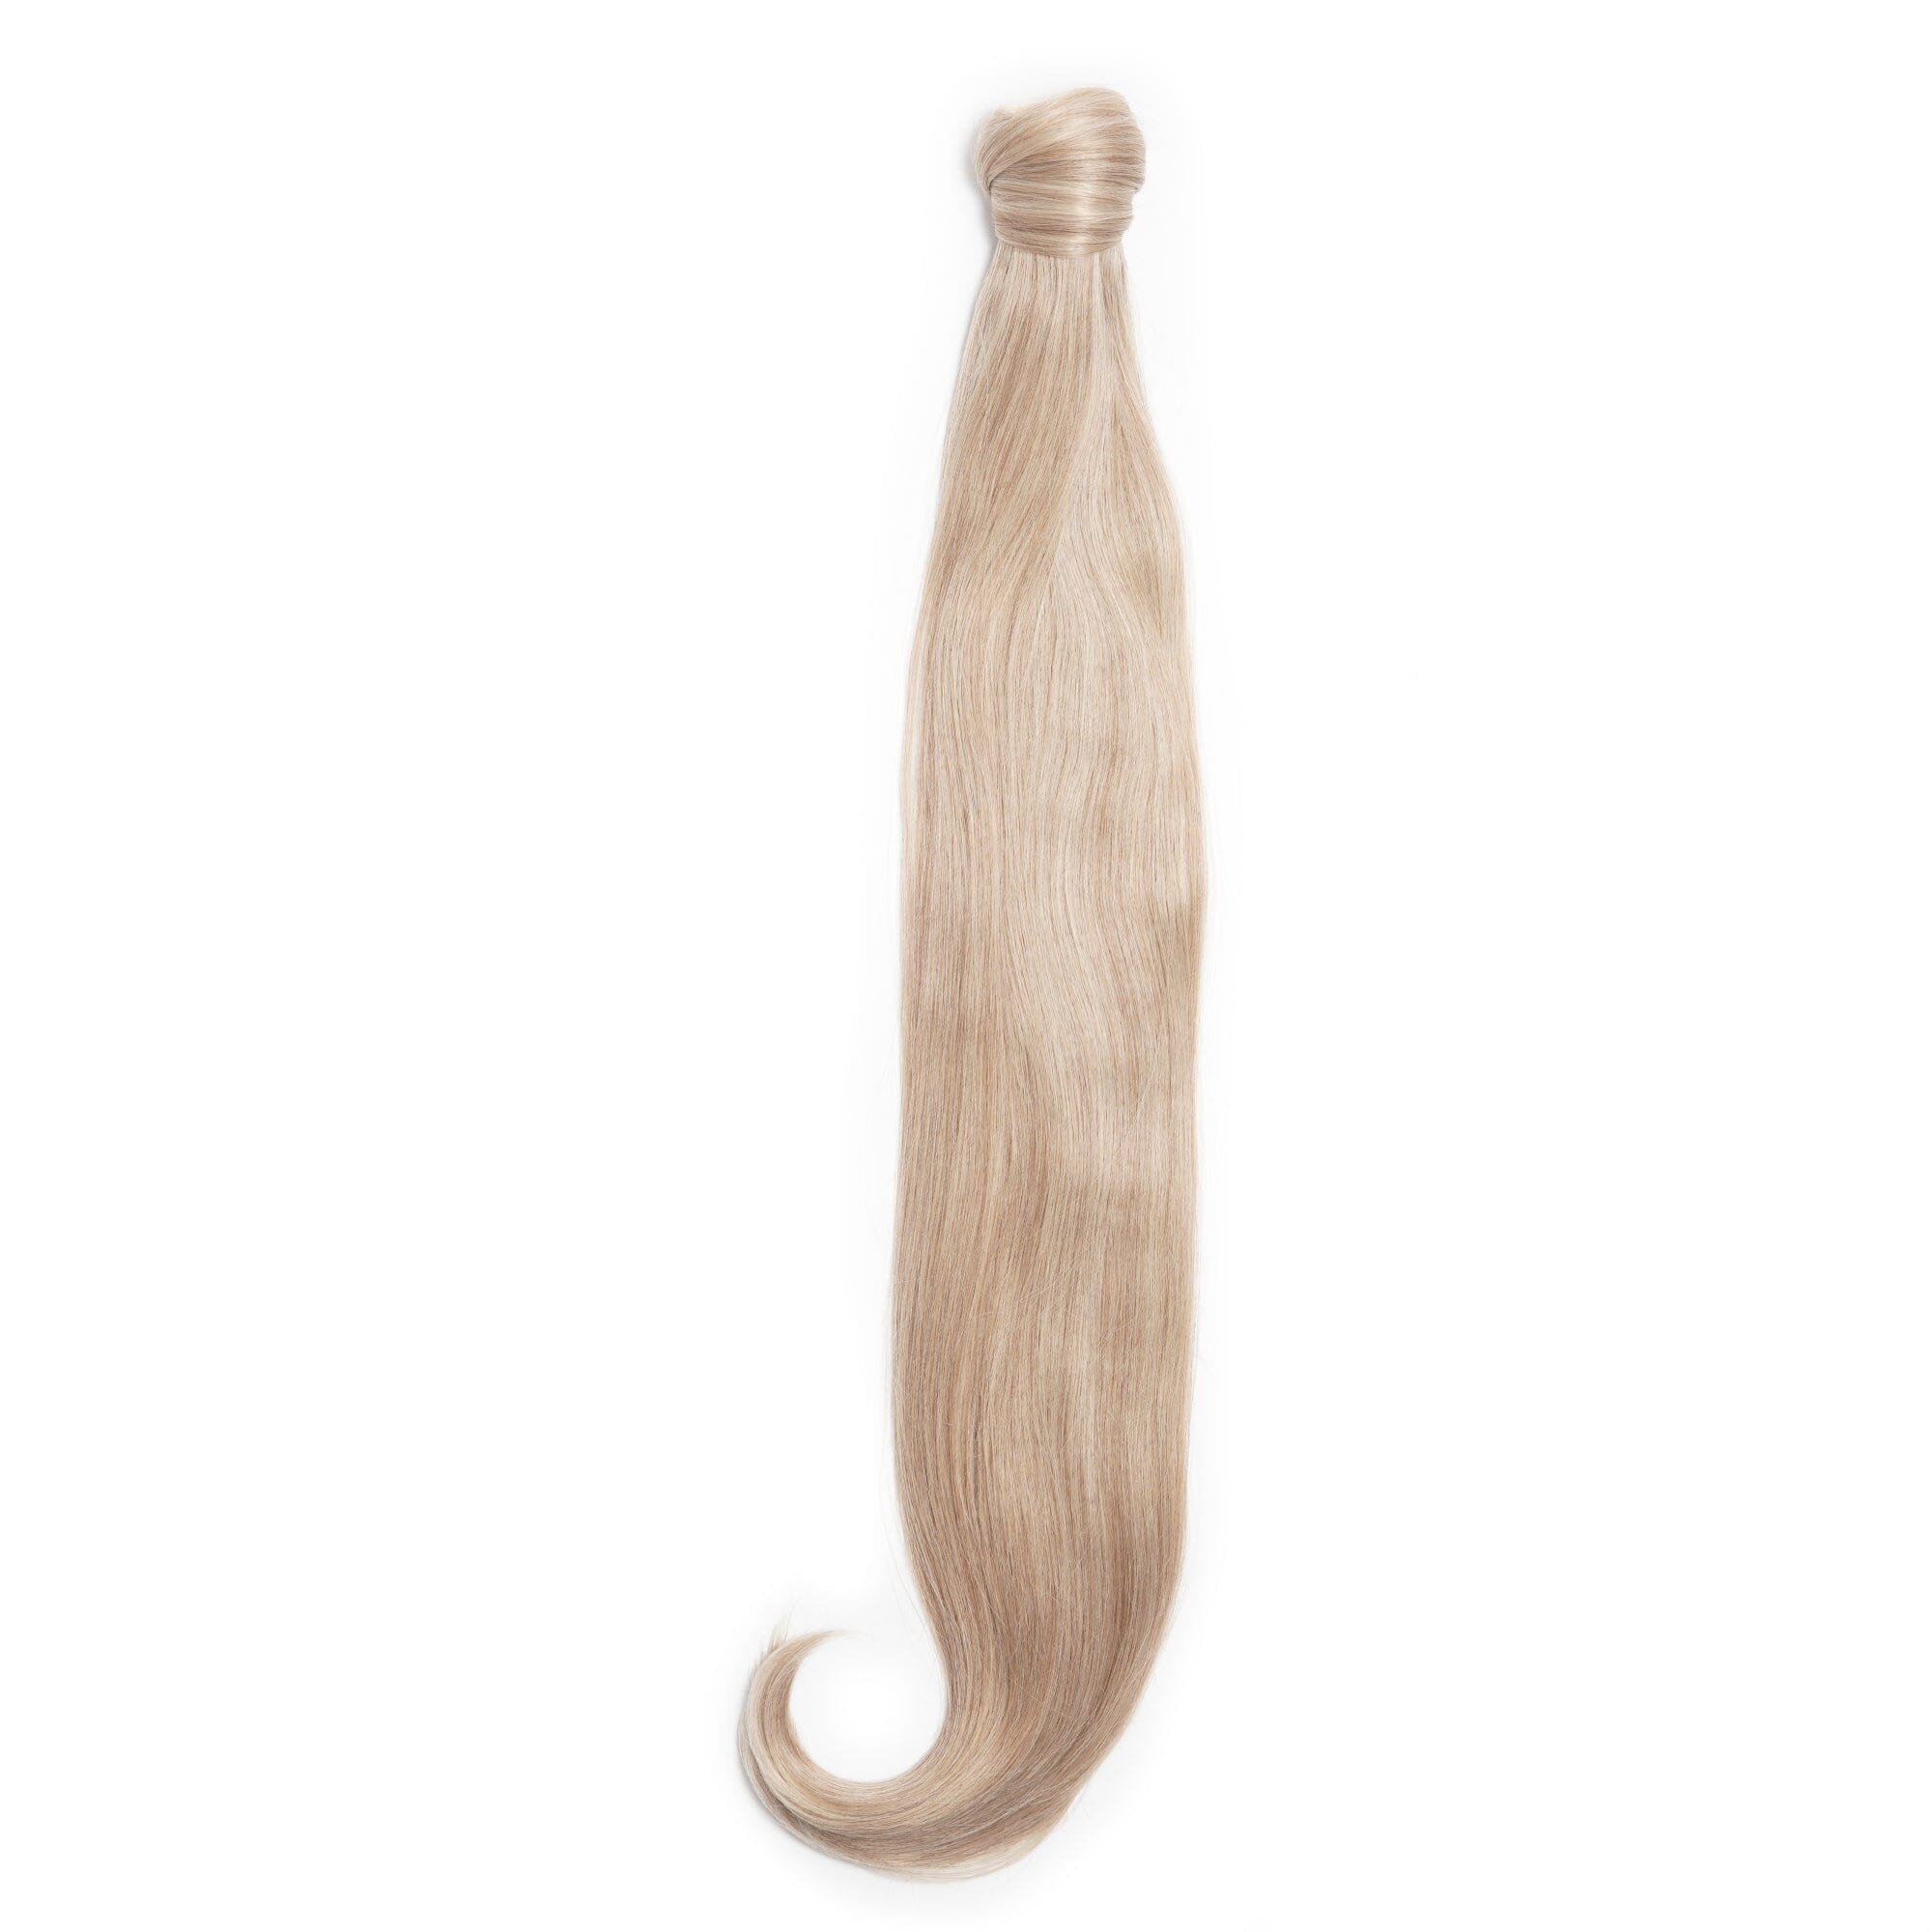 Long Clip-In Ponytails (22" - 30") Clip In Ponytail Easilocks 26" Silky Straight Bouncy Ponytail Ash Blonde 